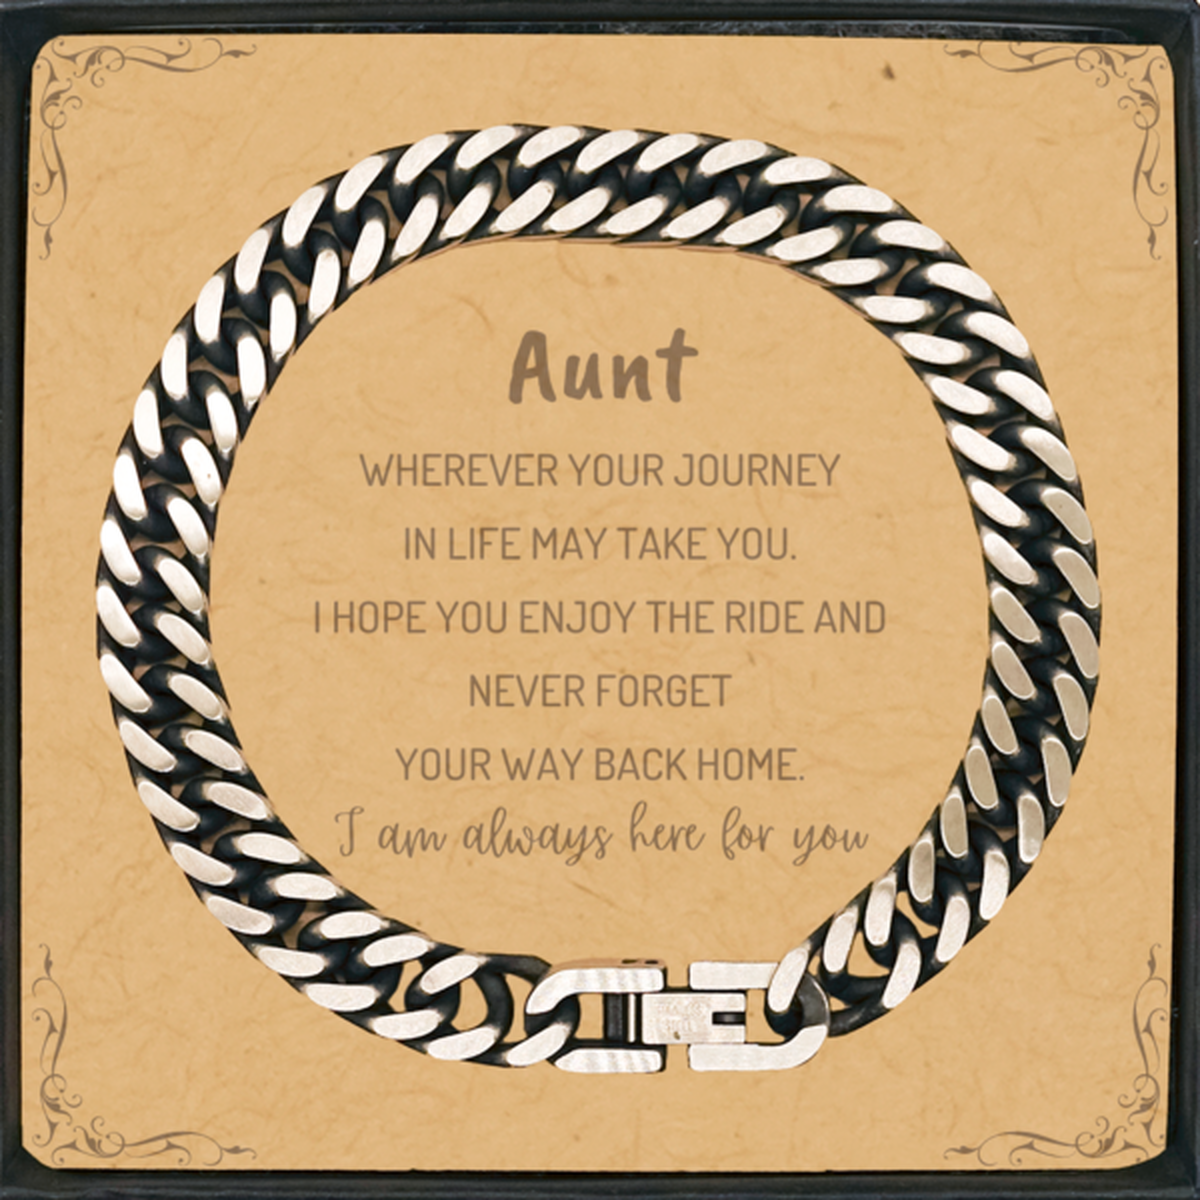 Aunt wherever your journey in life may take you, I am always here for you Aunt Cuban Link Chain Bracelet, Awesome Christmas Gifts For Aunt Message Card, Aunt Birthday Gifts for Men Women Family Loved One